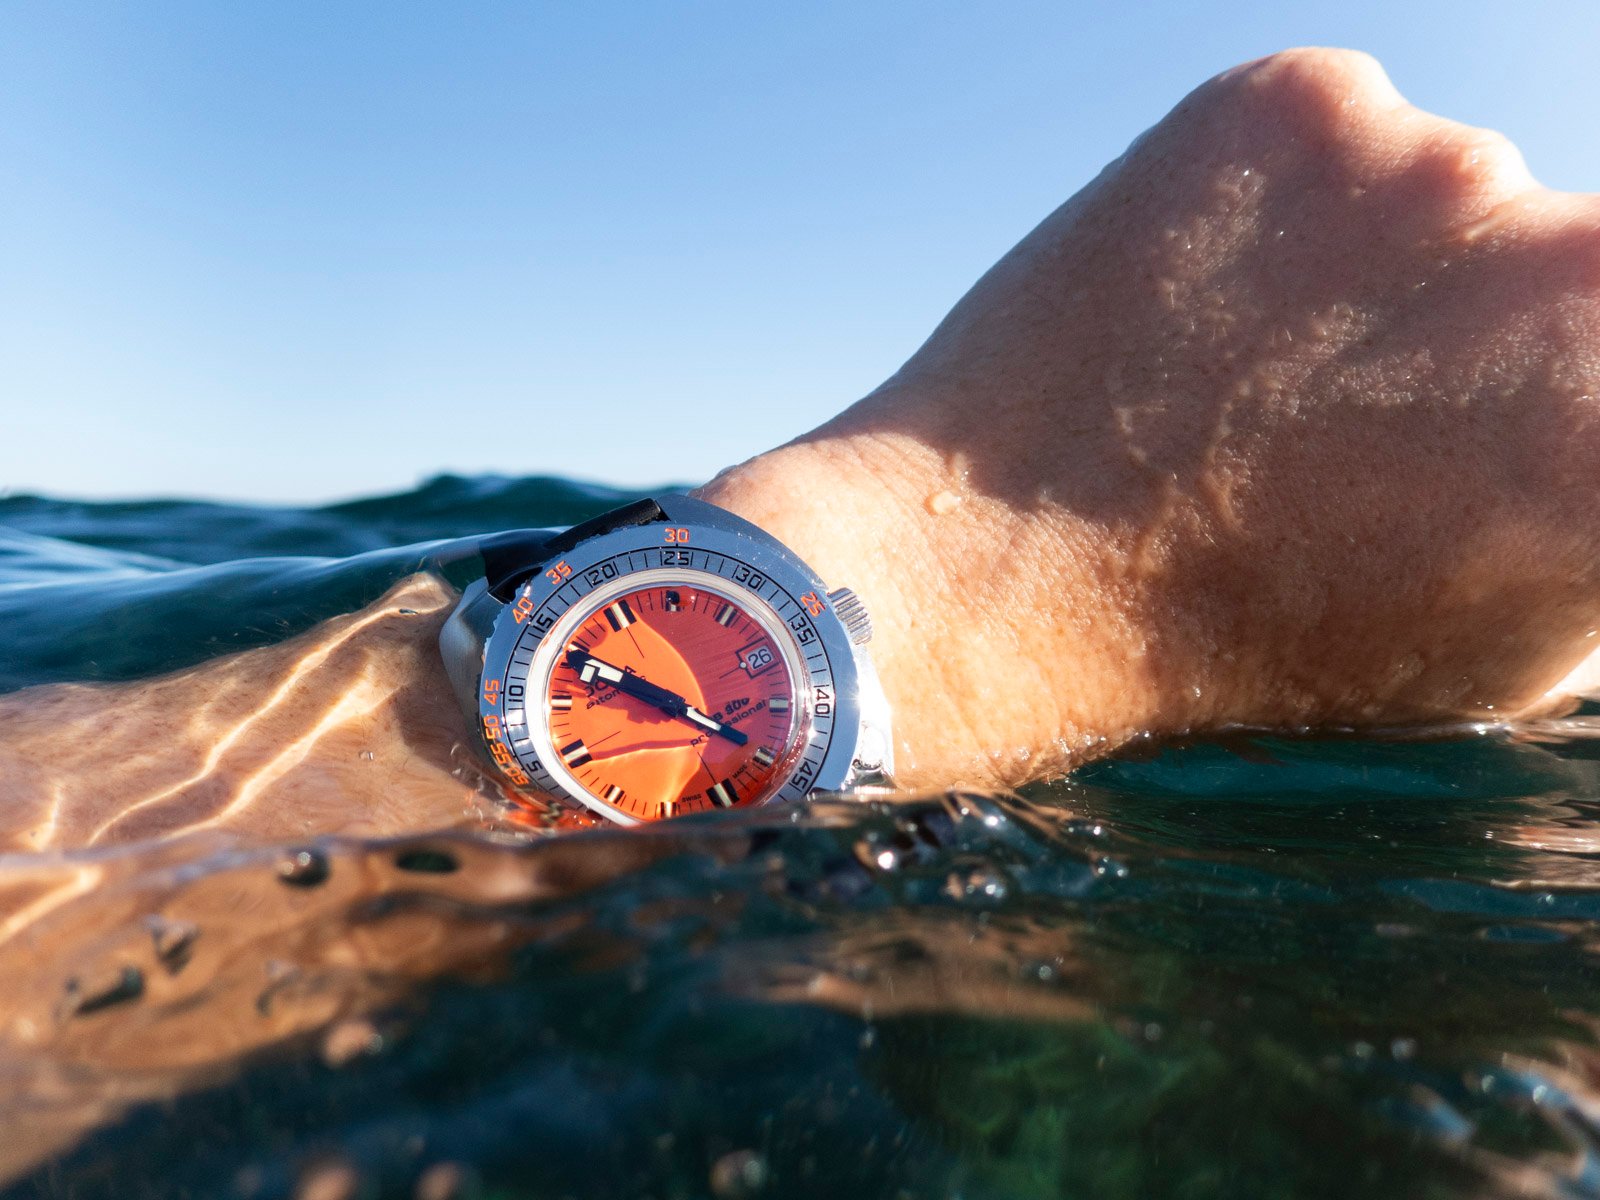 eBay Finds: Chronographs, Divers, and All the LED Watches You Could Ever Want